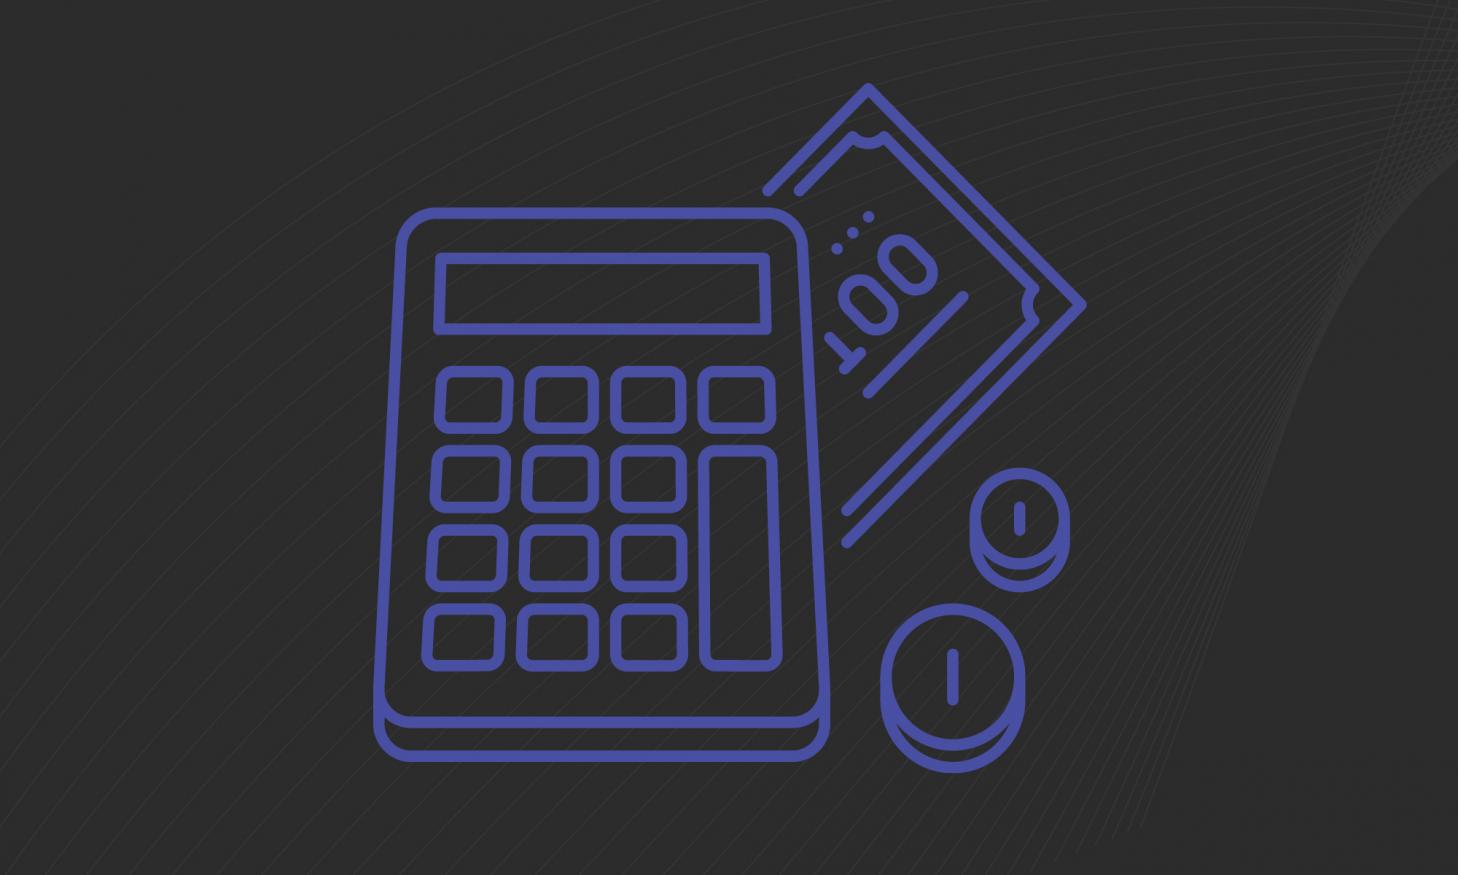 A graphic of a purple calculator on a black background